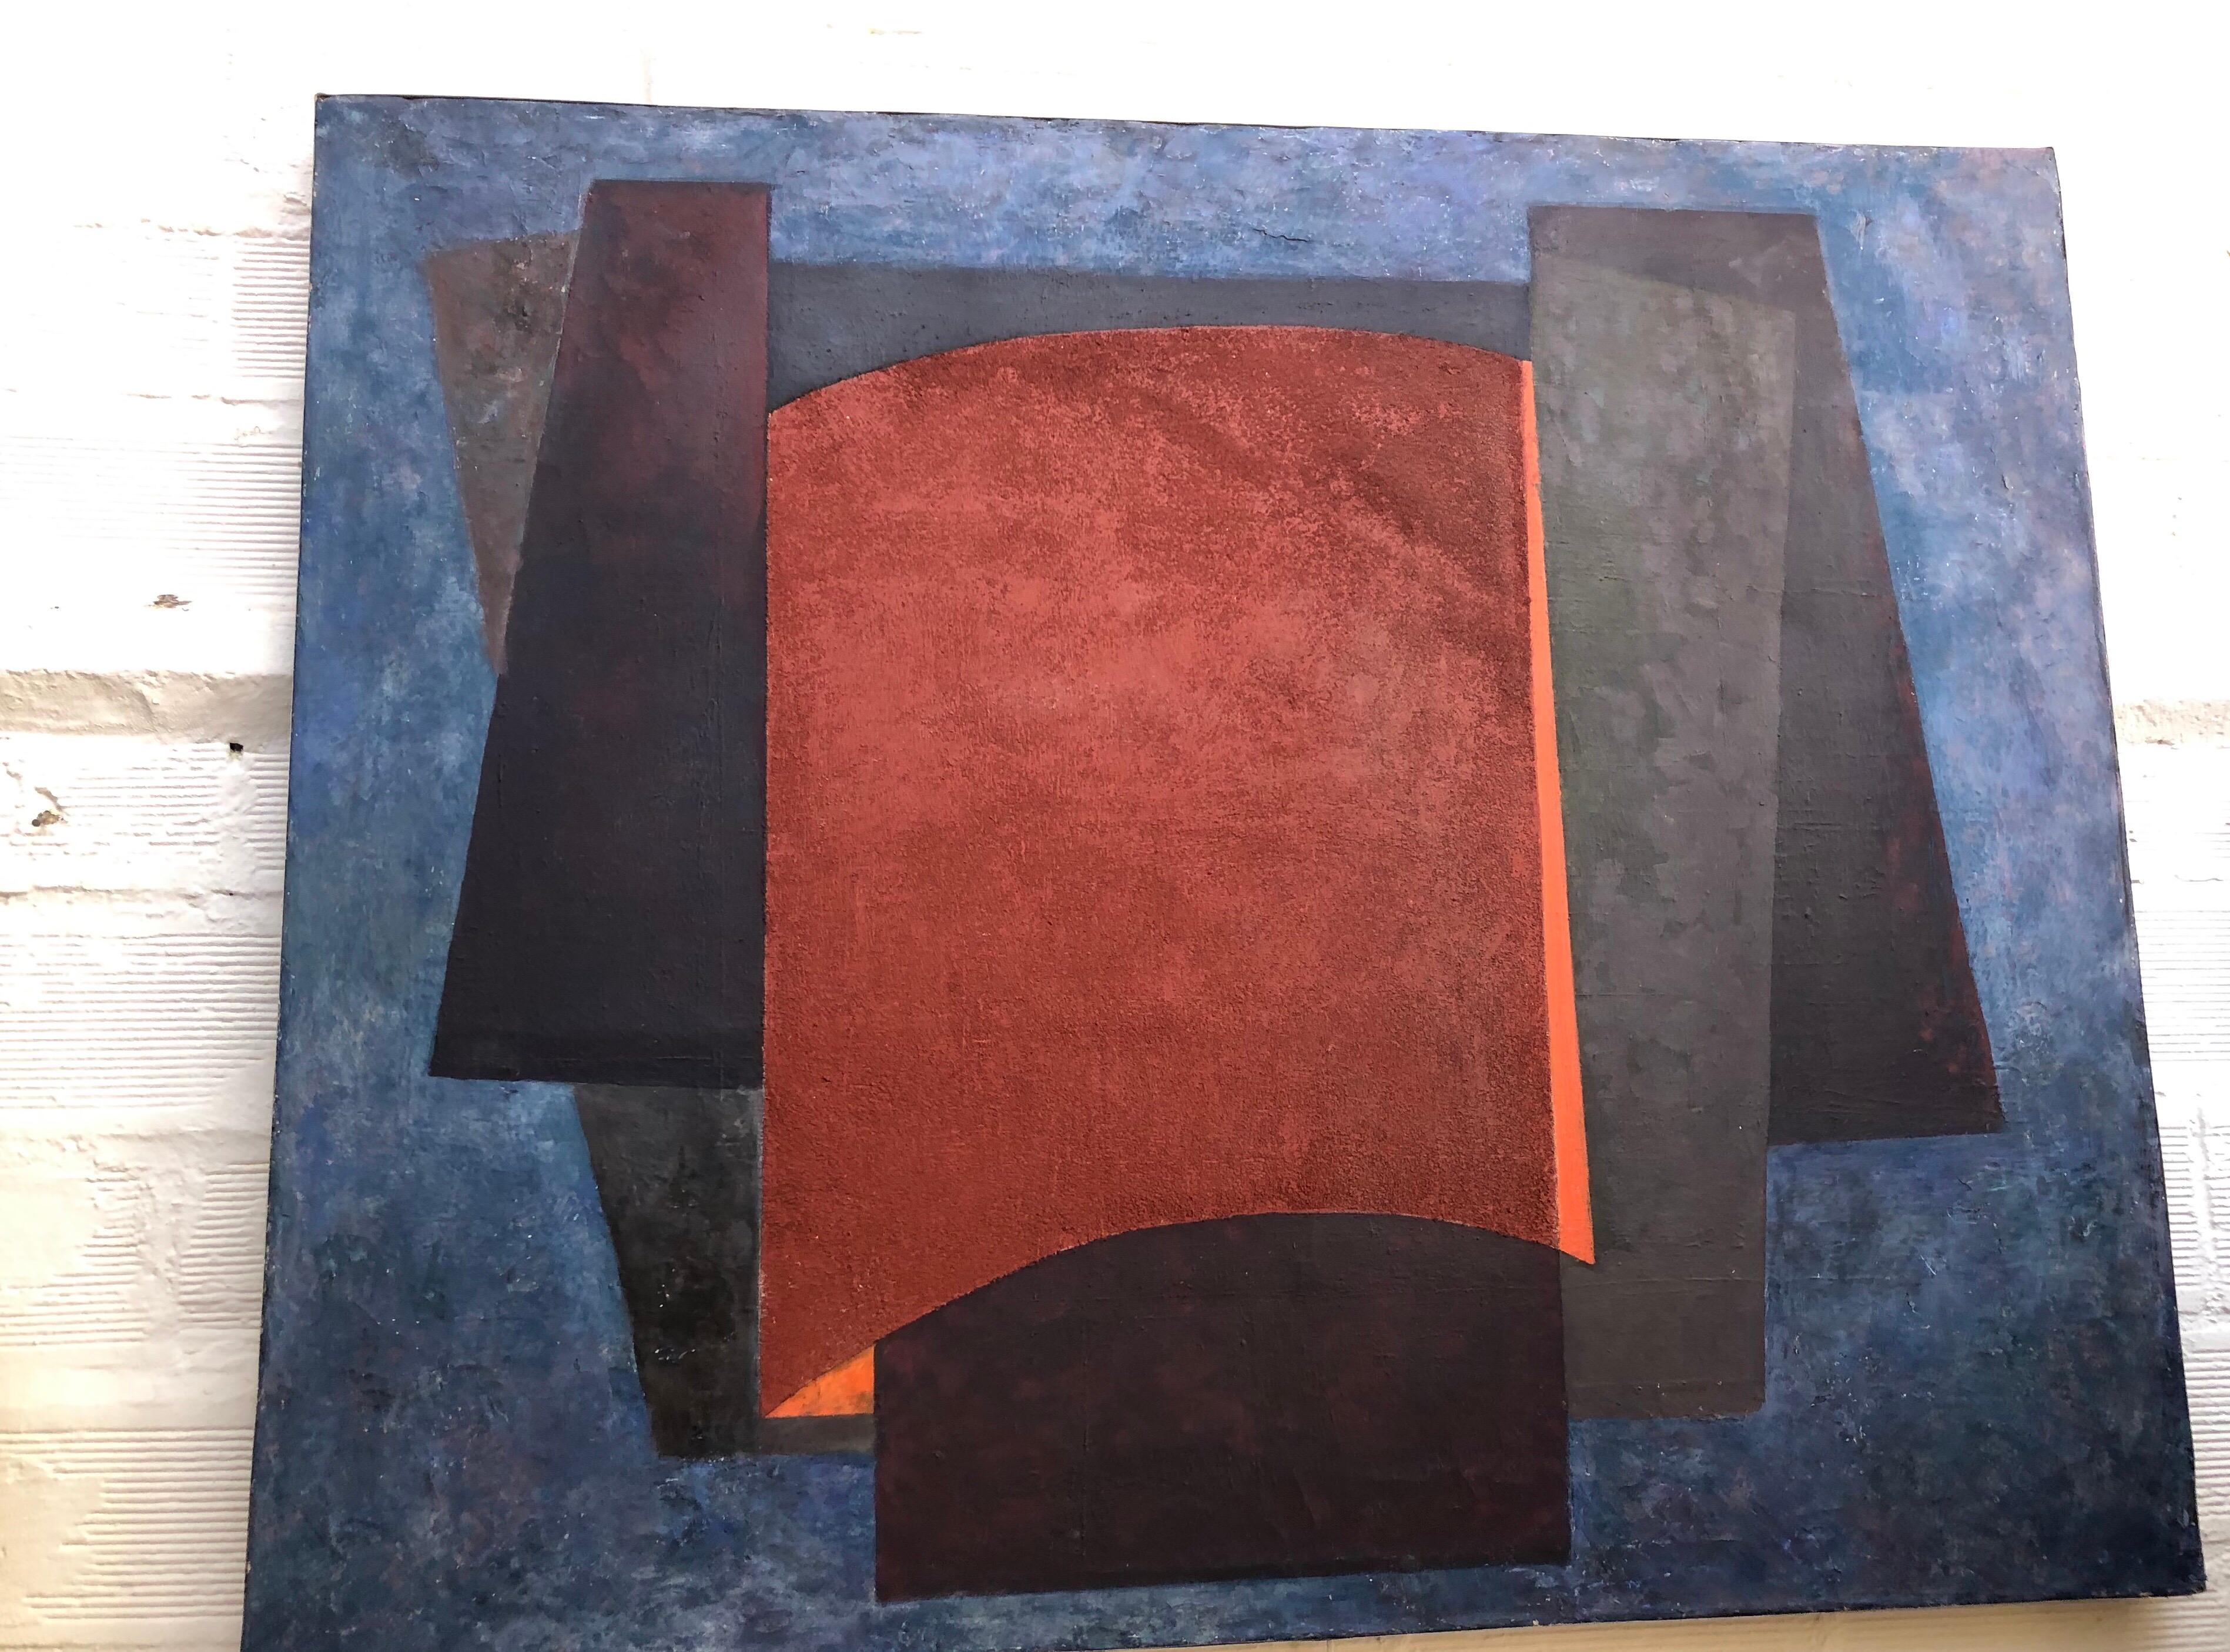 An exceptional abstract expressionism painting signed PAULET circa 1950
Poliakoff school.